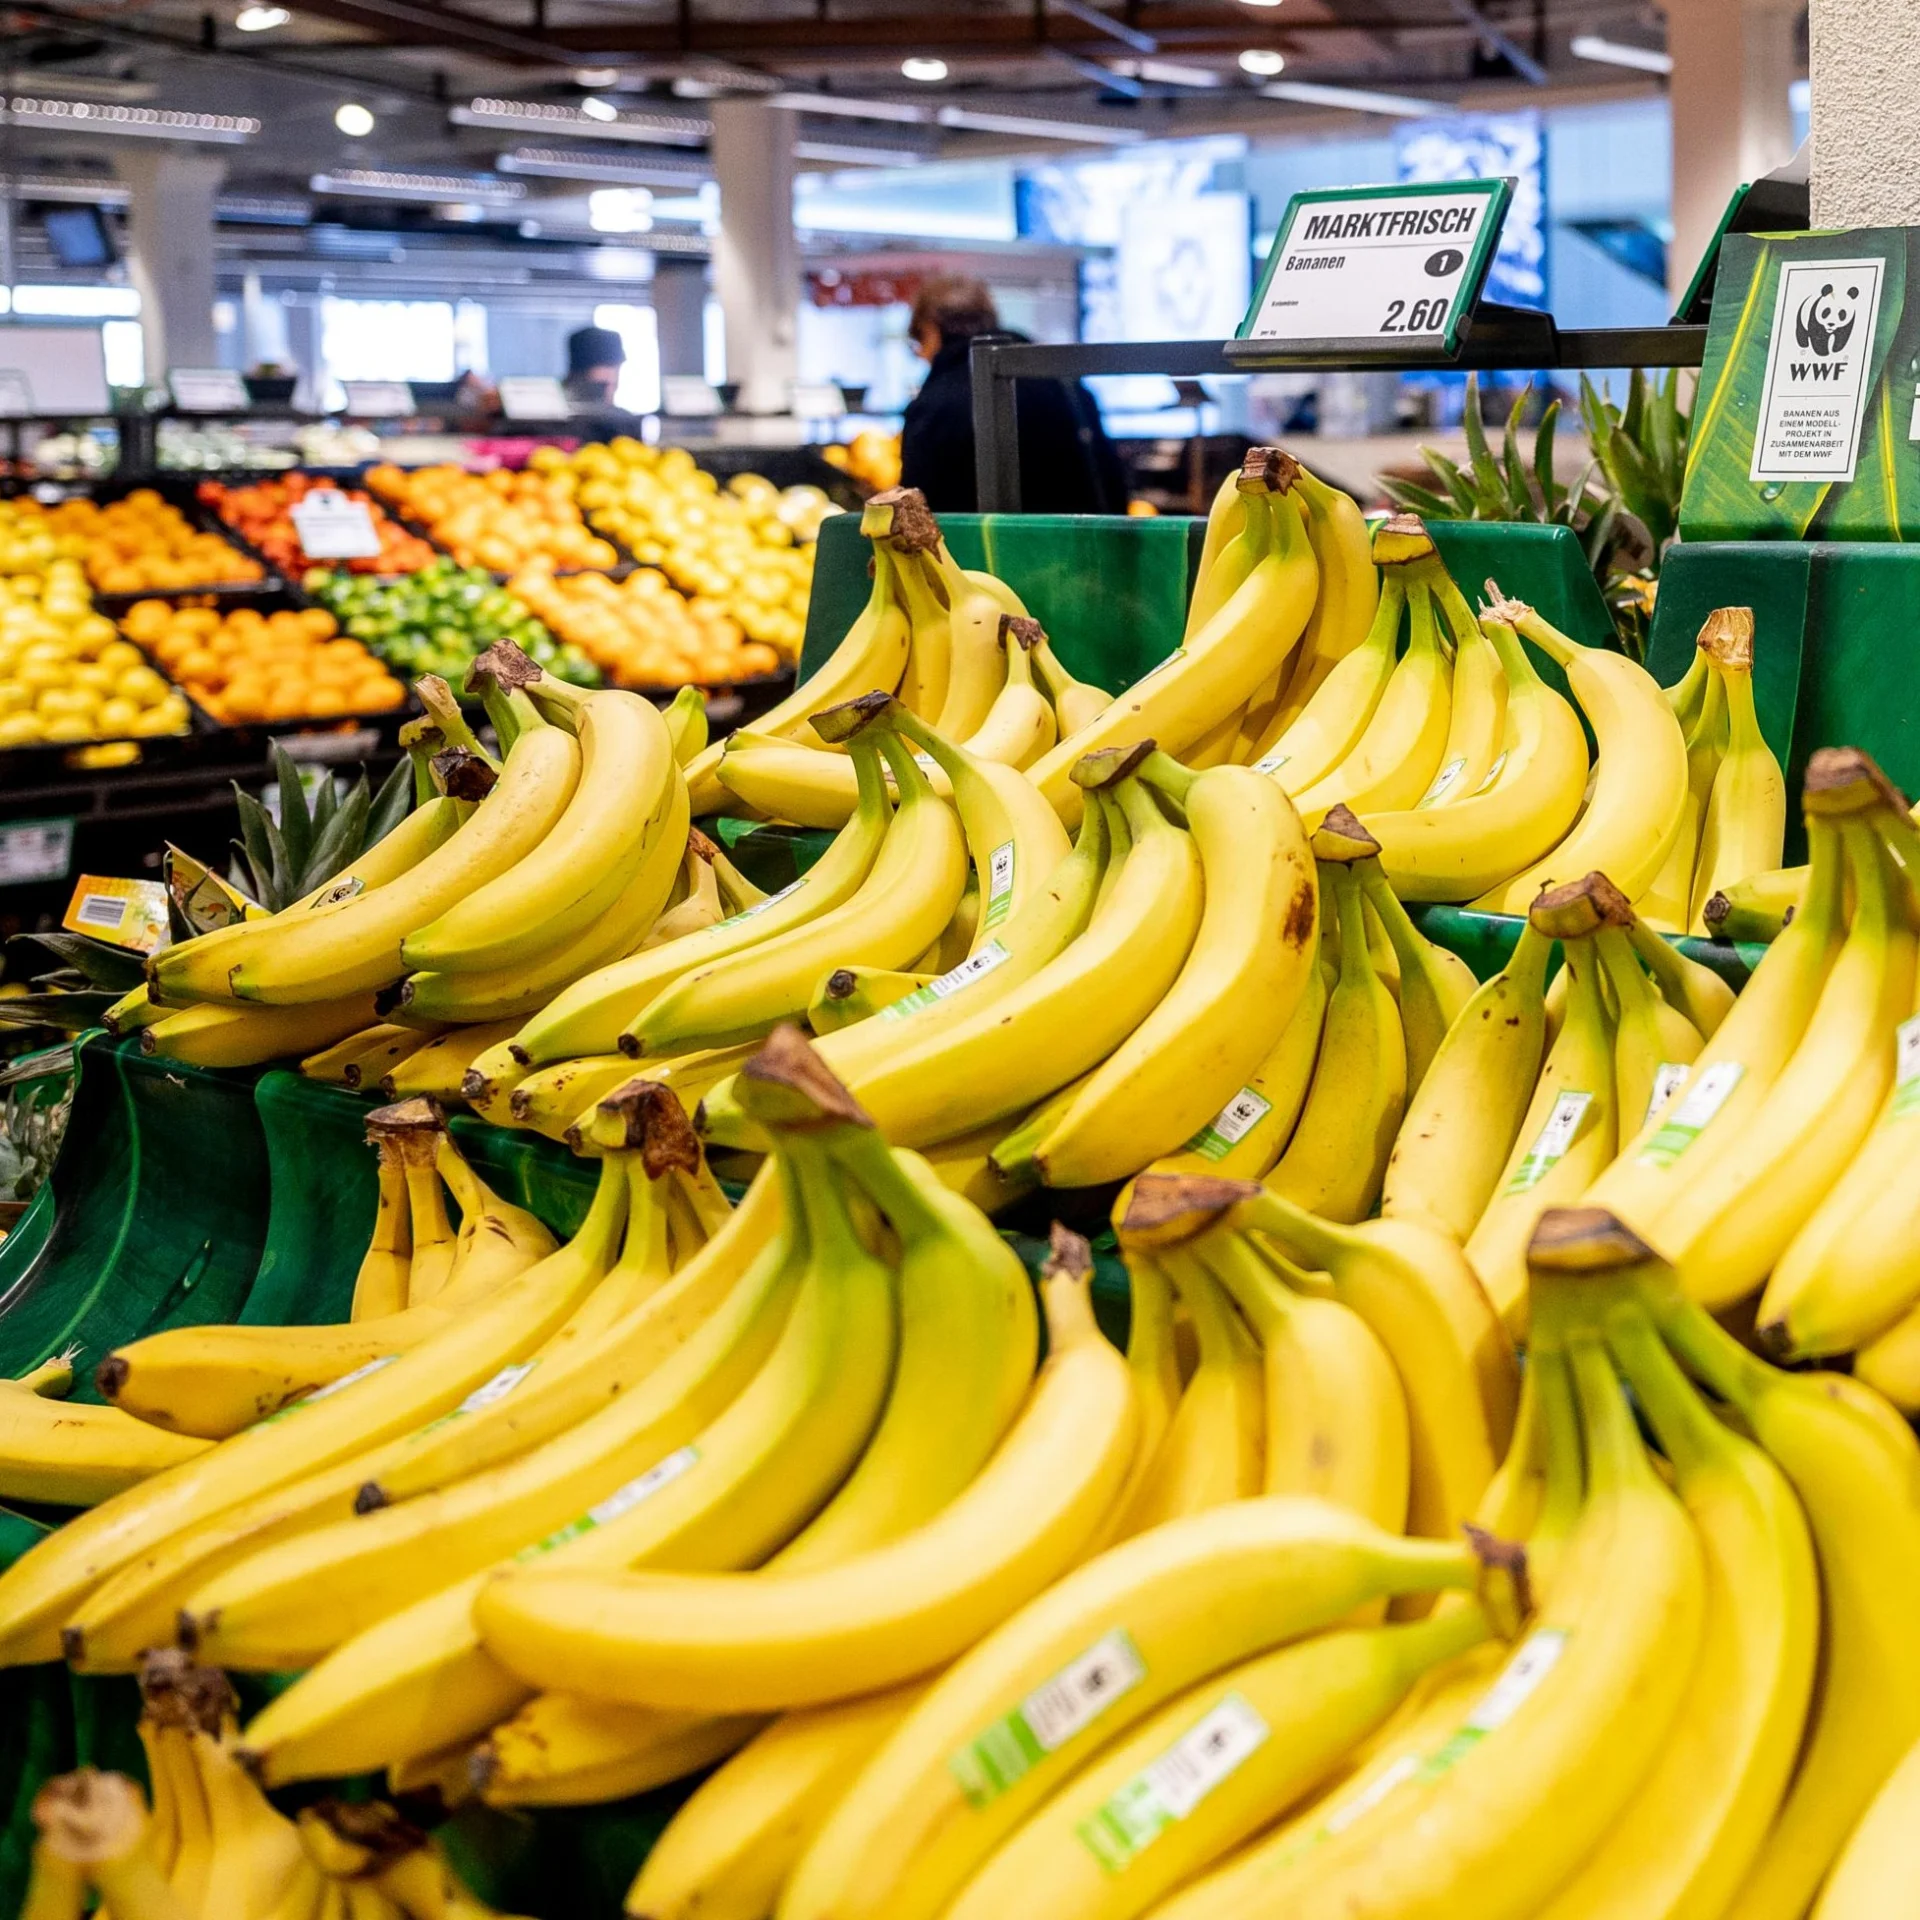 A stack of yellow bananas on the supermarket shelf.